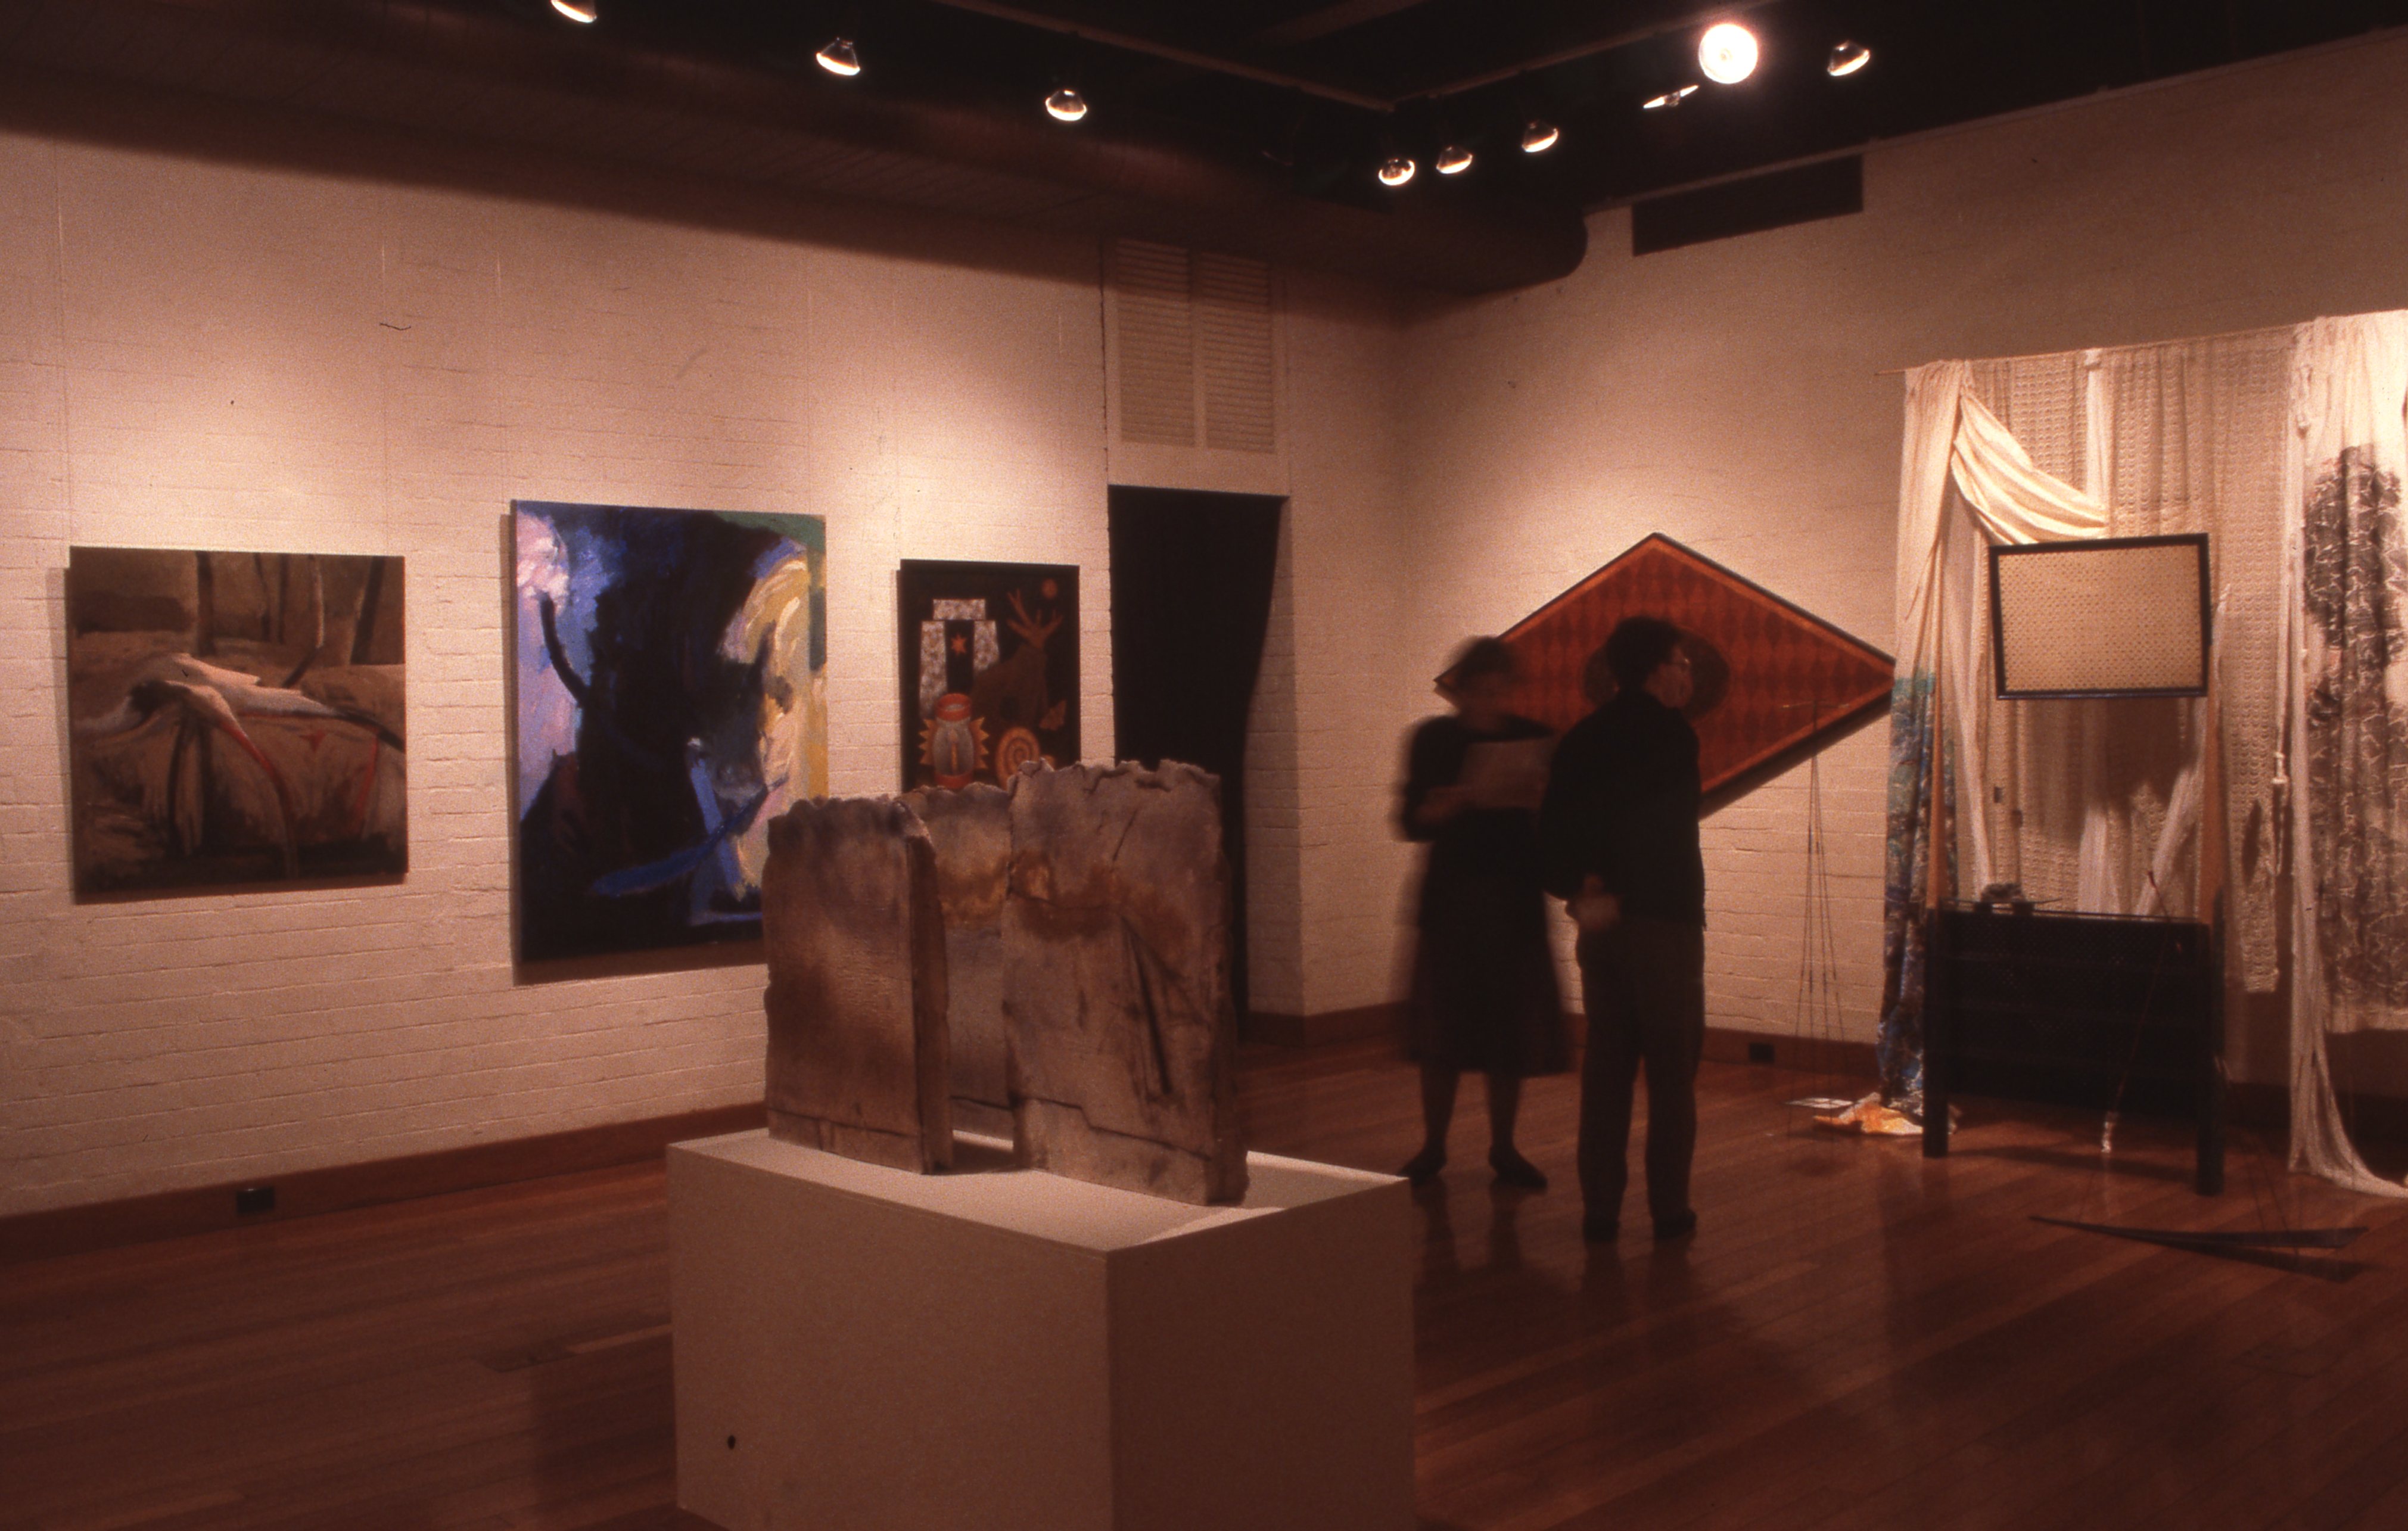 idg_archive_1987_post-graduate_masters_student_exhibitions_002_install.jpg